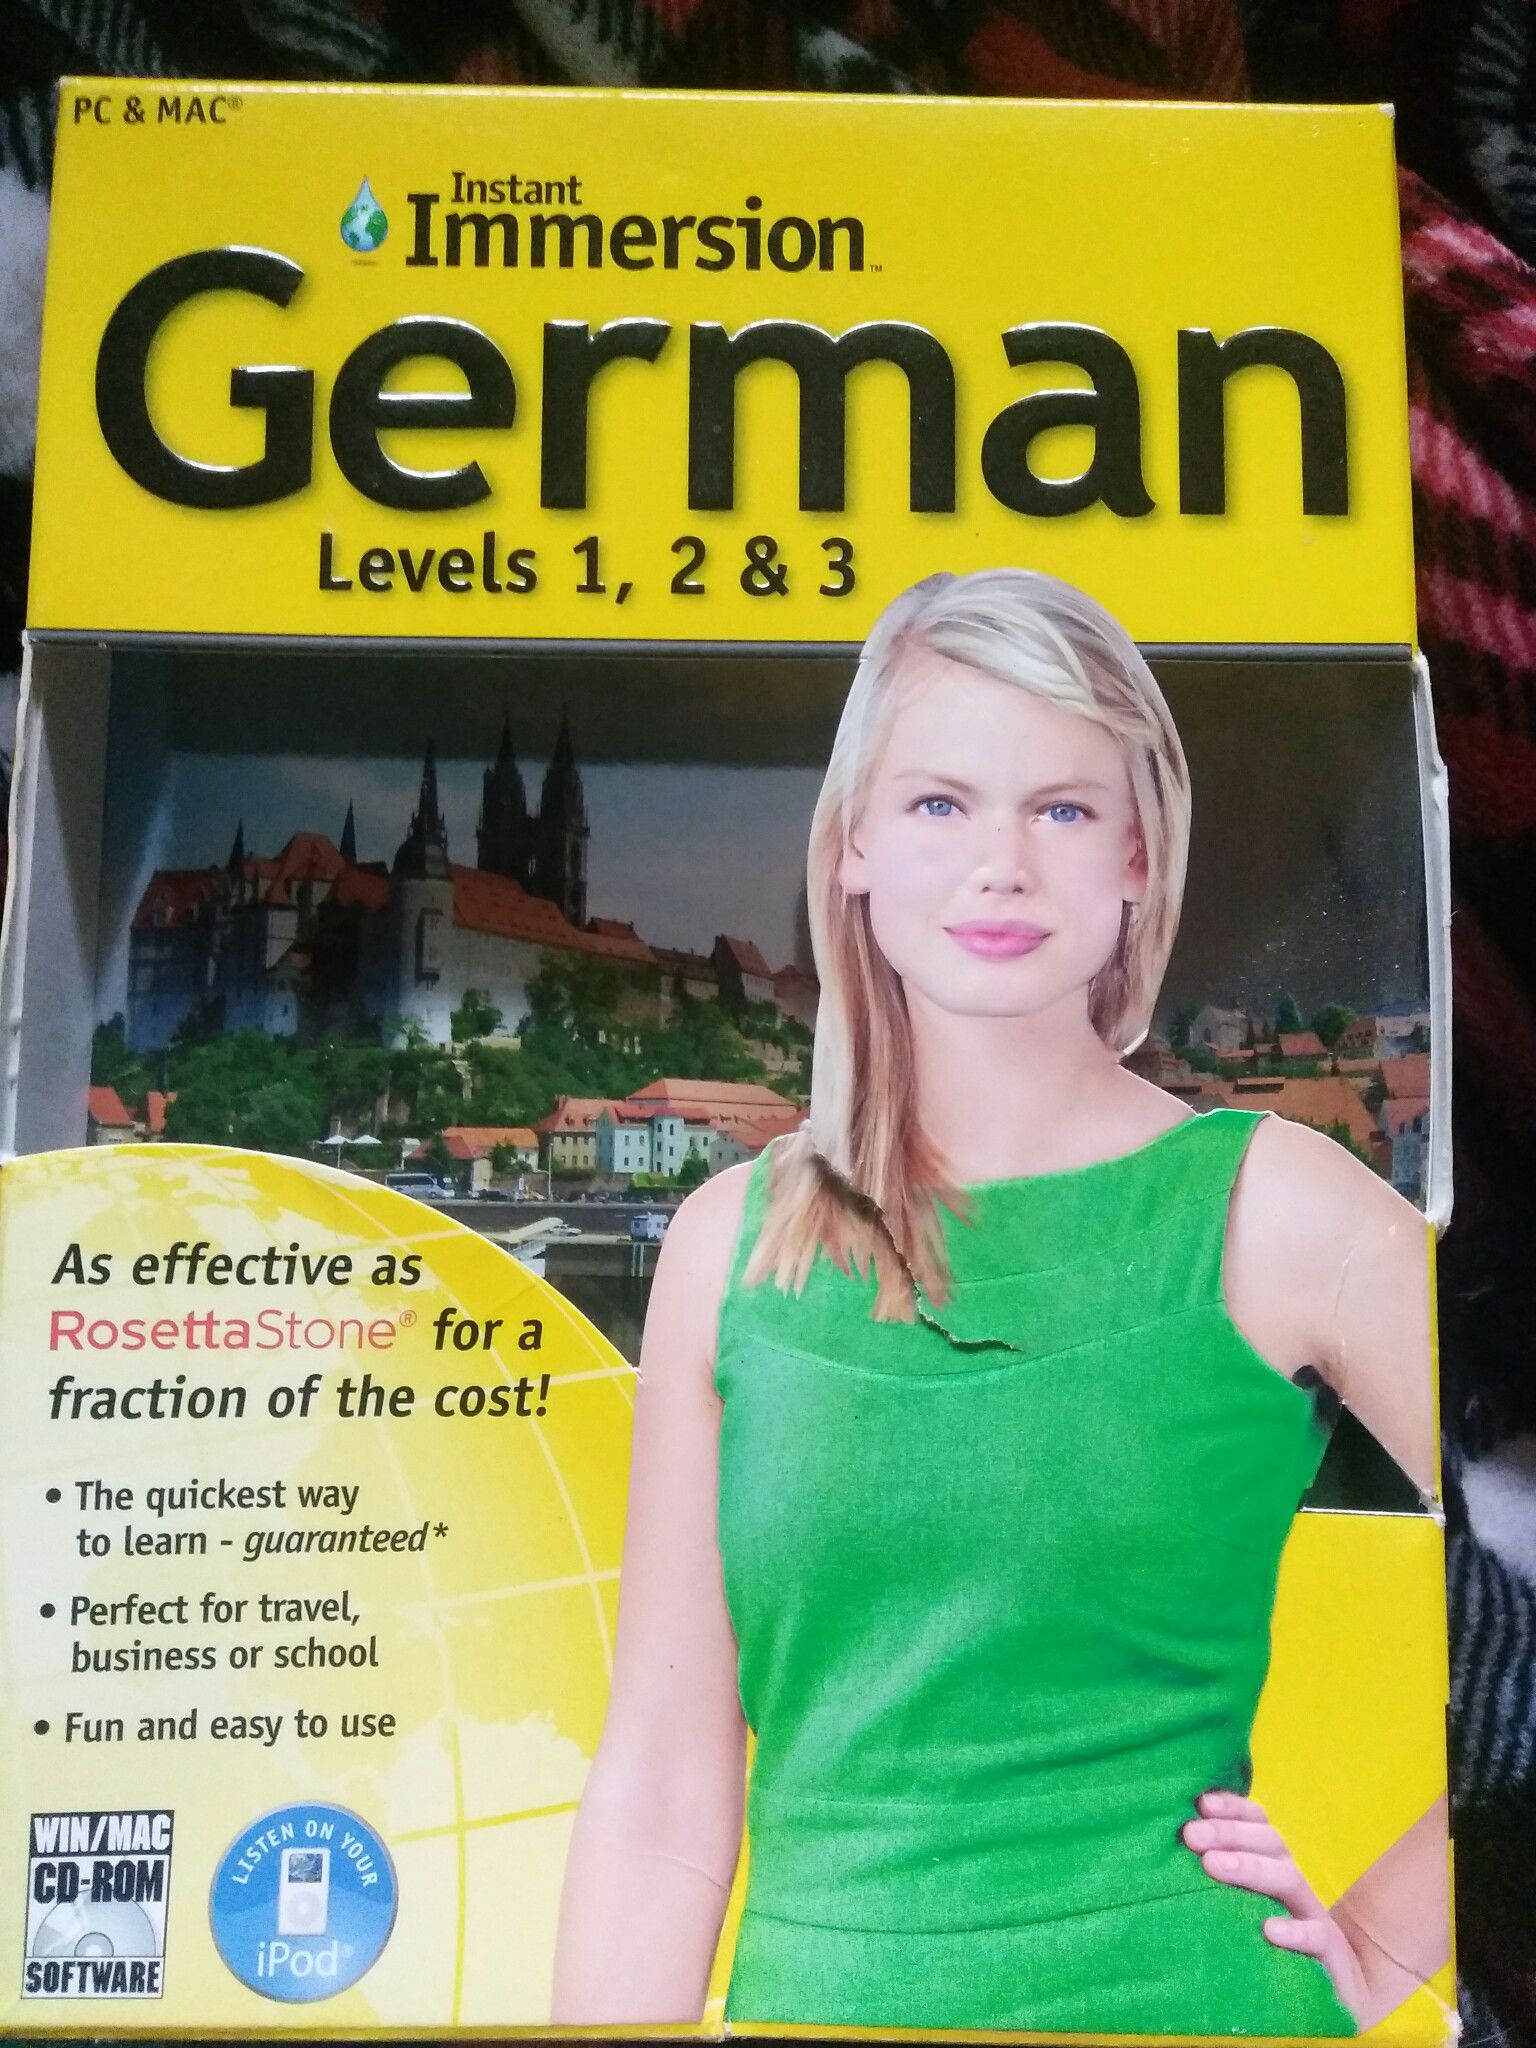 Instant immersion German